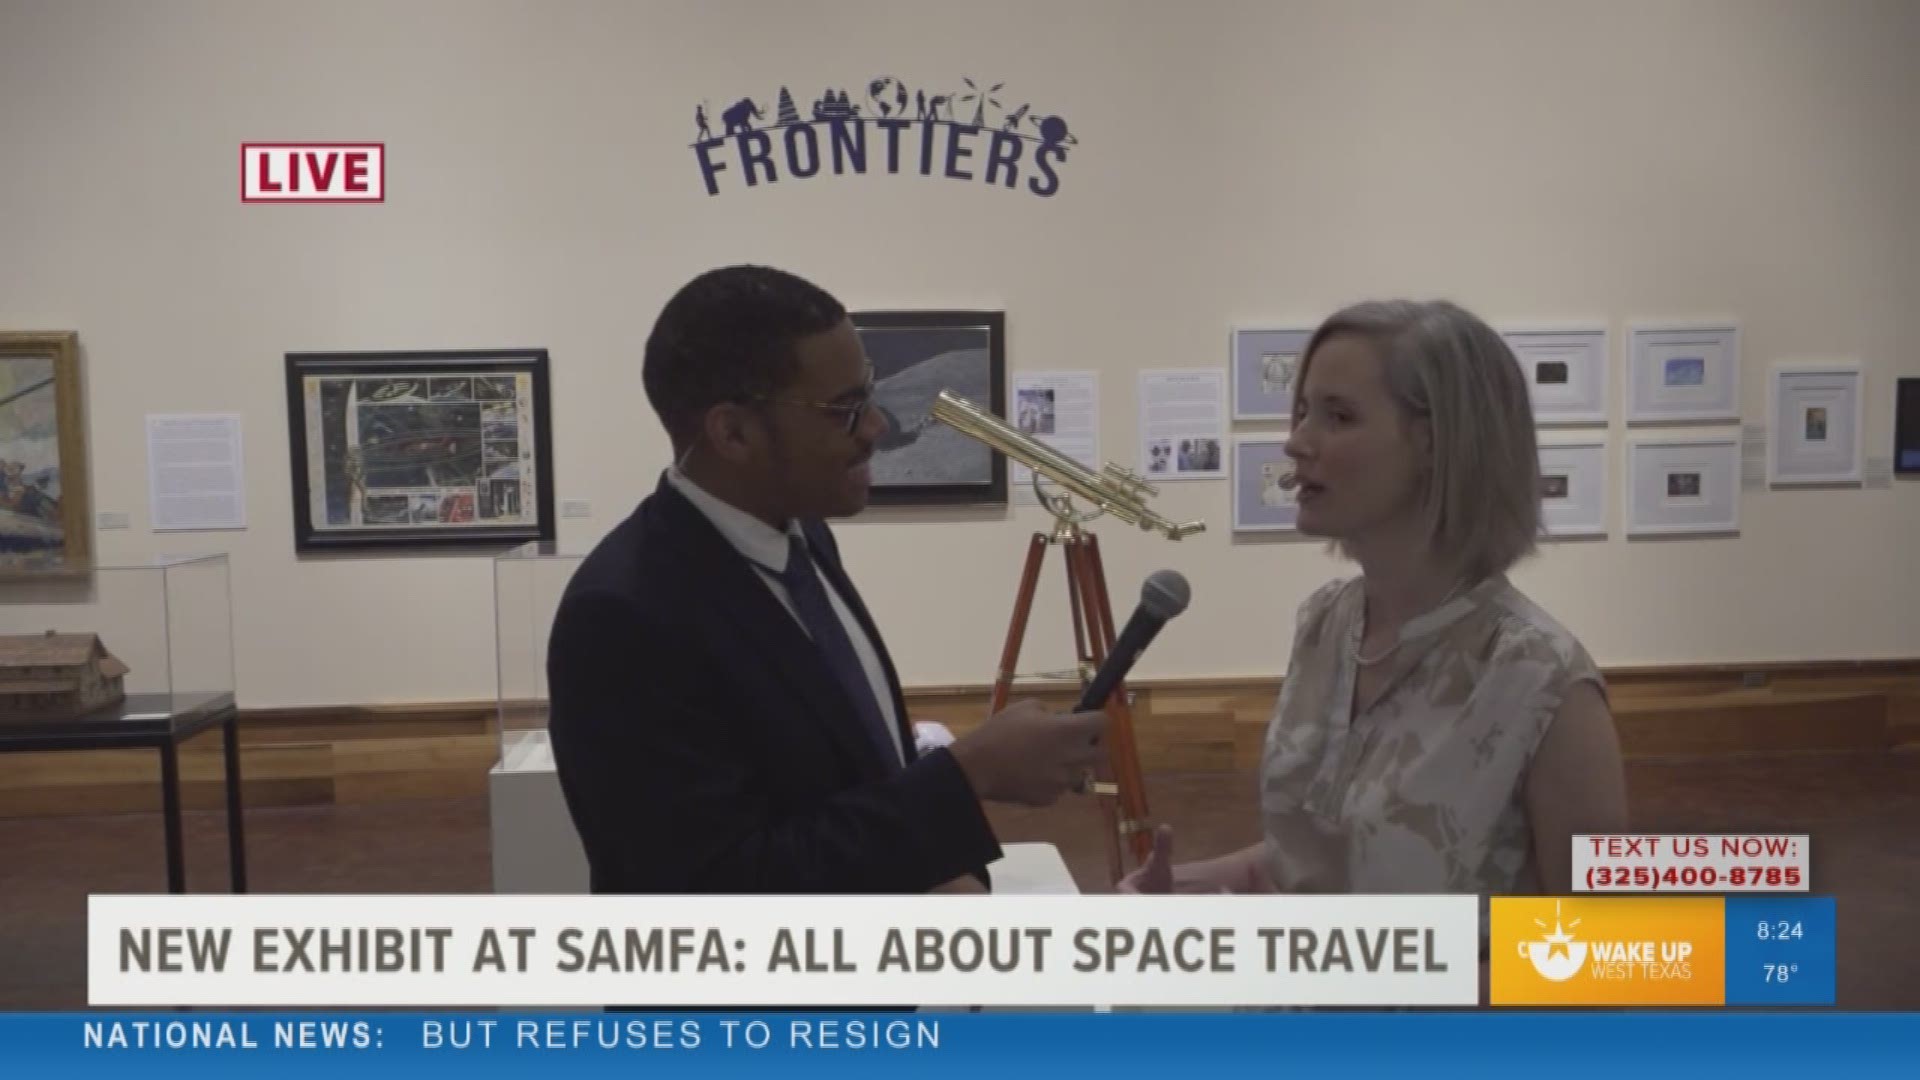 Our Malik Mingo spoke with the collections manager at the San Angelo Museum of Fine Arts about a new exhibit that showcases the future of space travel in honor of the Apollo 11 landing 50 years ago.